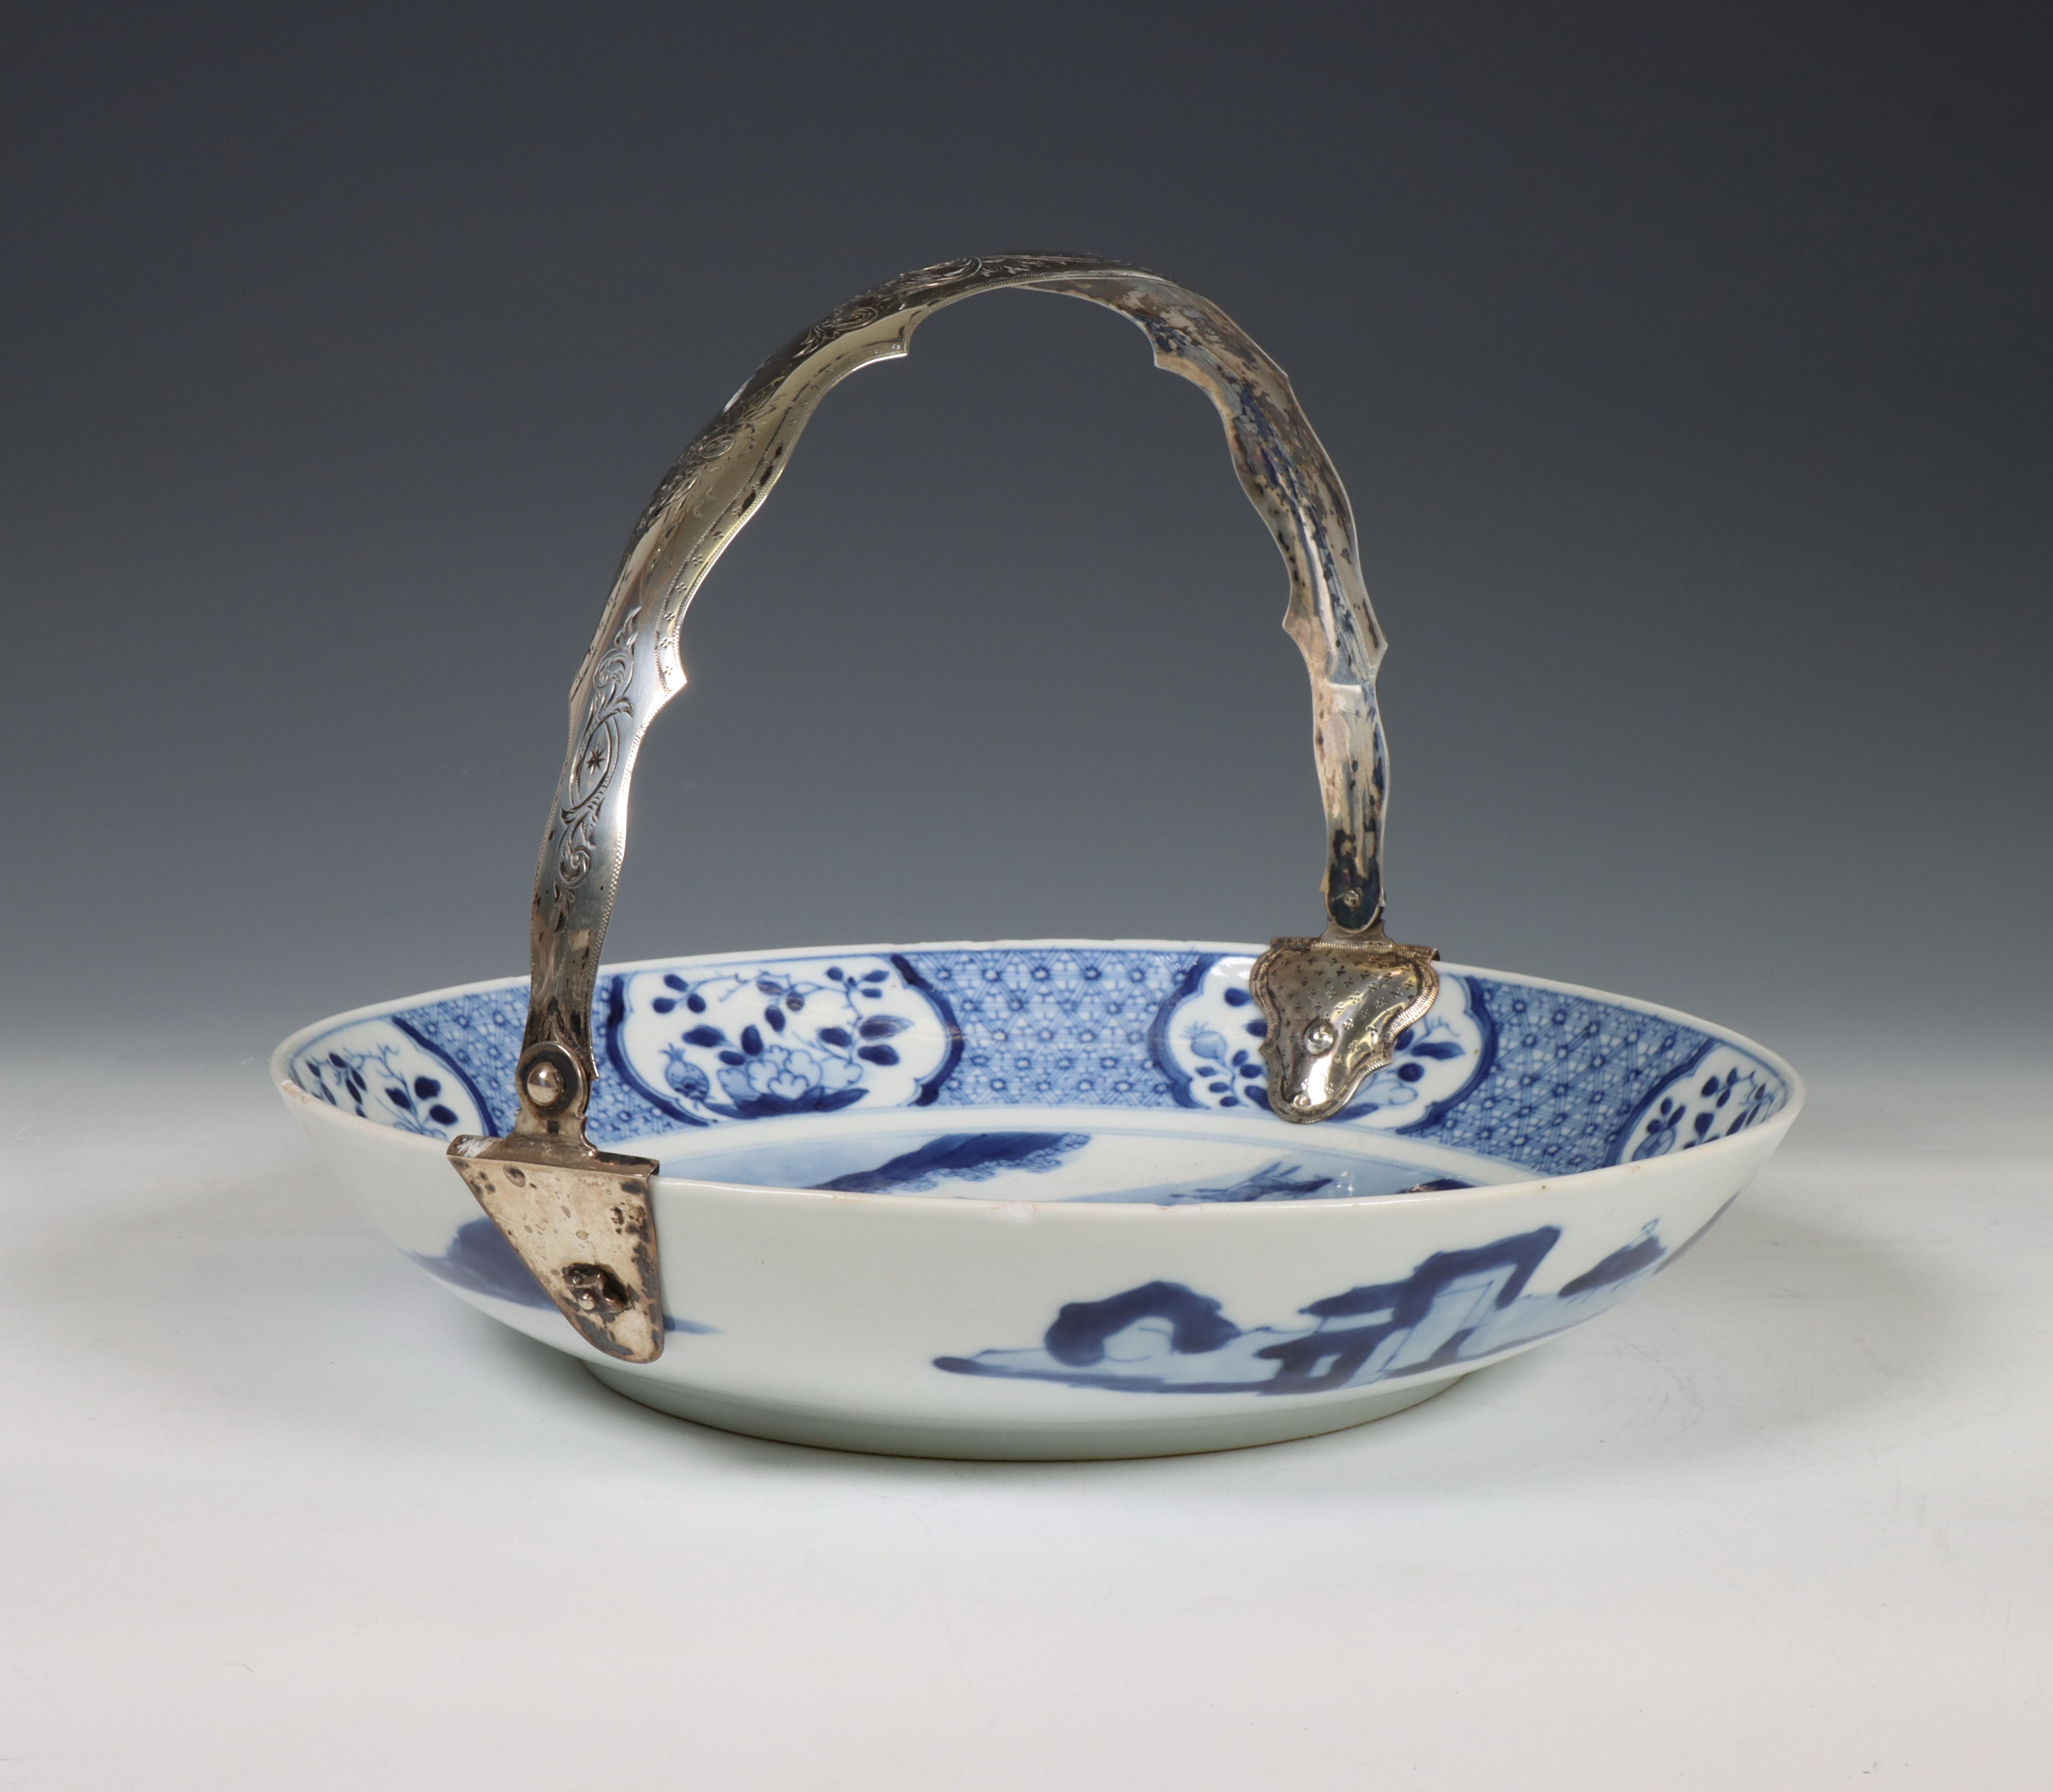 China, silver-mounted blue and white porcelain 'Joosje te paard' dish, 18th-19th century, - Image 4 of 4